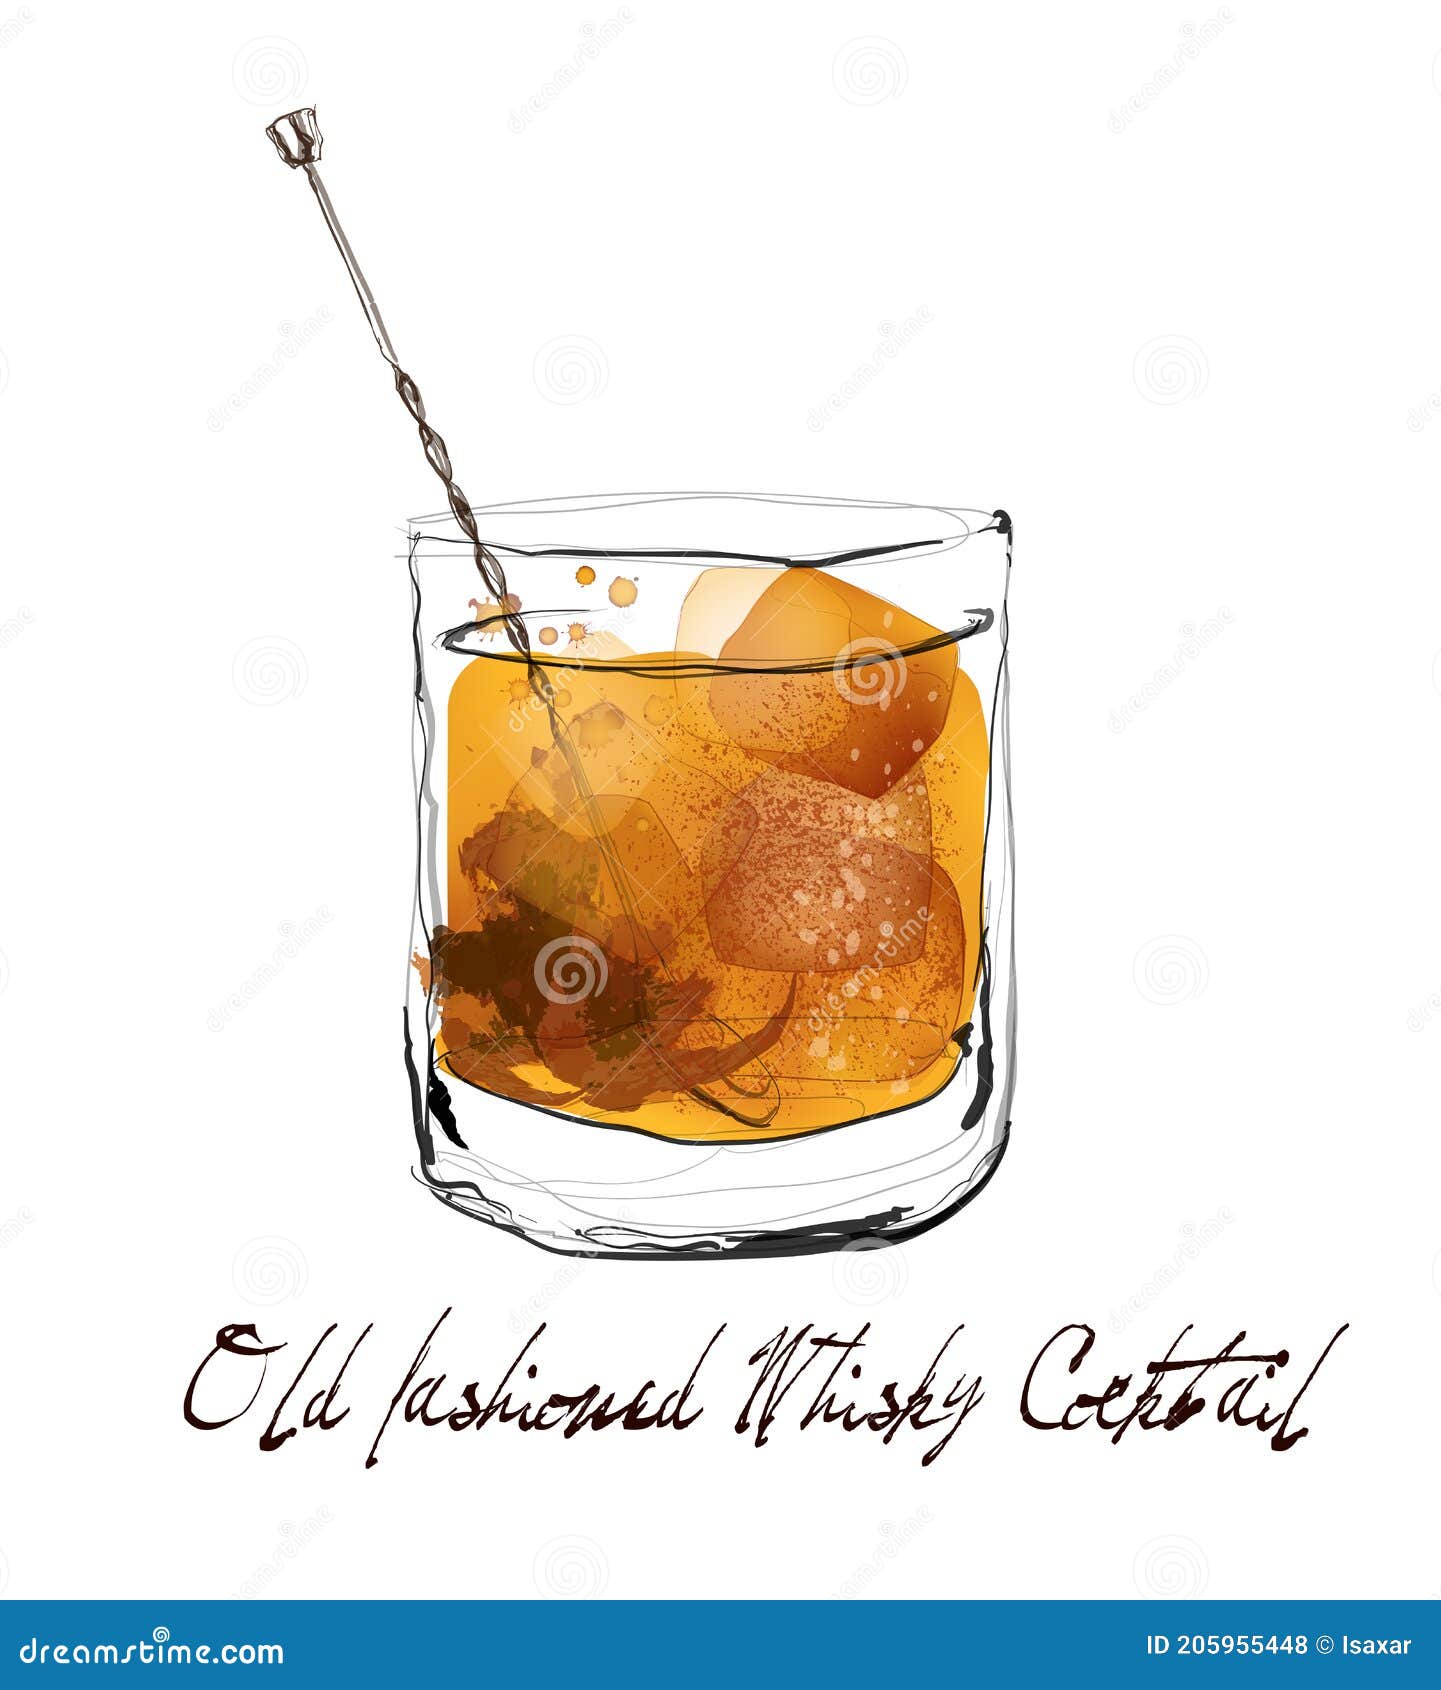 old fashioned whisky cocktail in watercolor style